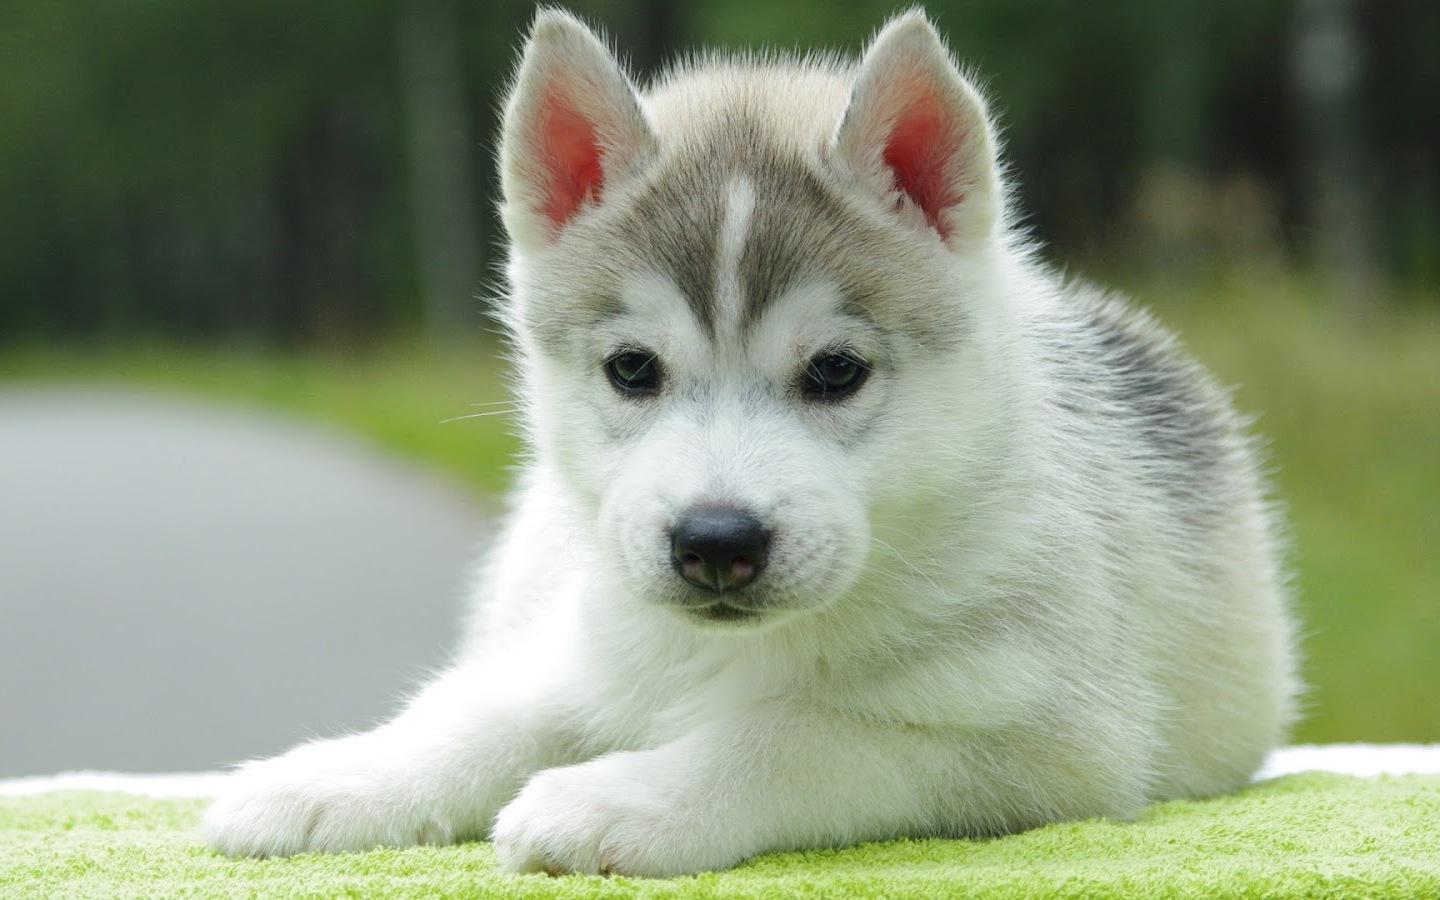  puppy wallpapers for desktop mobile backgroundscute puppy wallpapers 1440x900